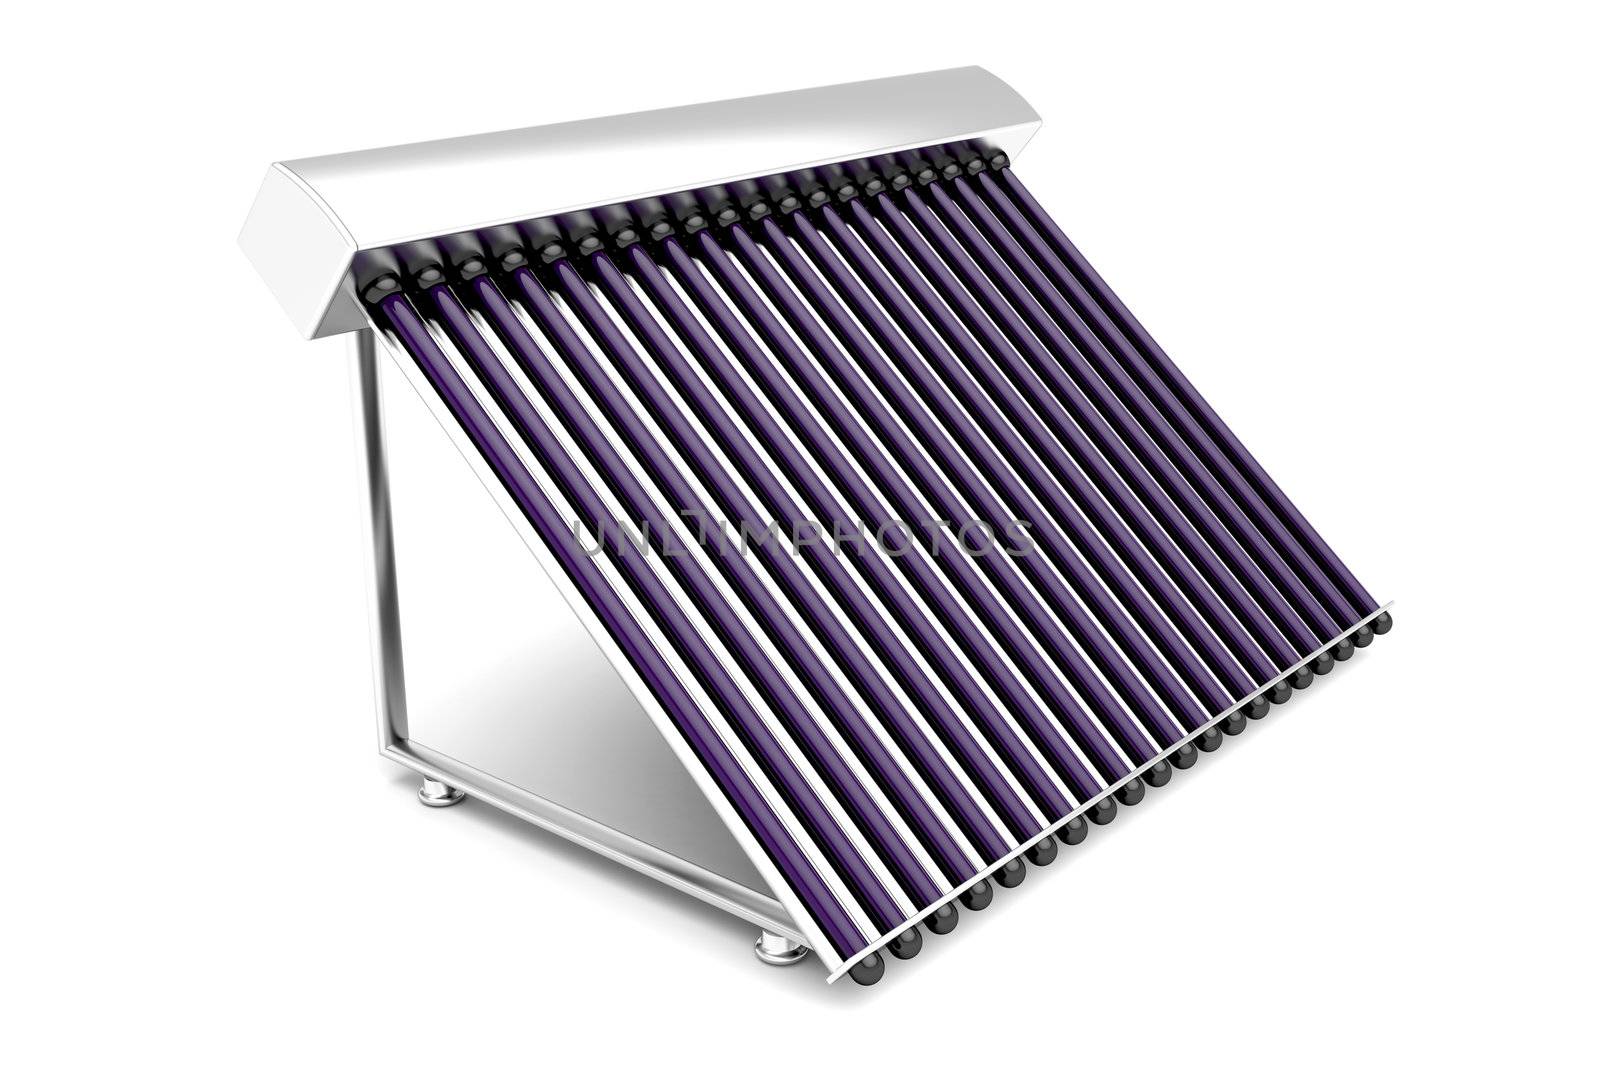 Solar water heater by magraphics